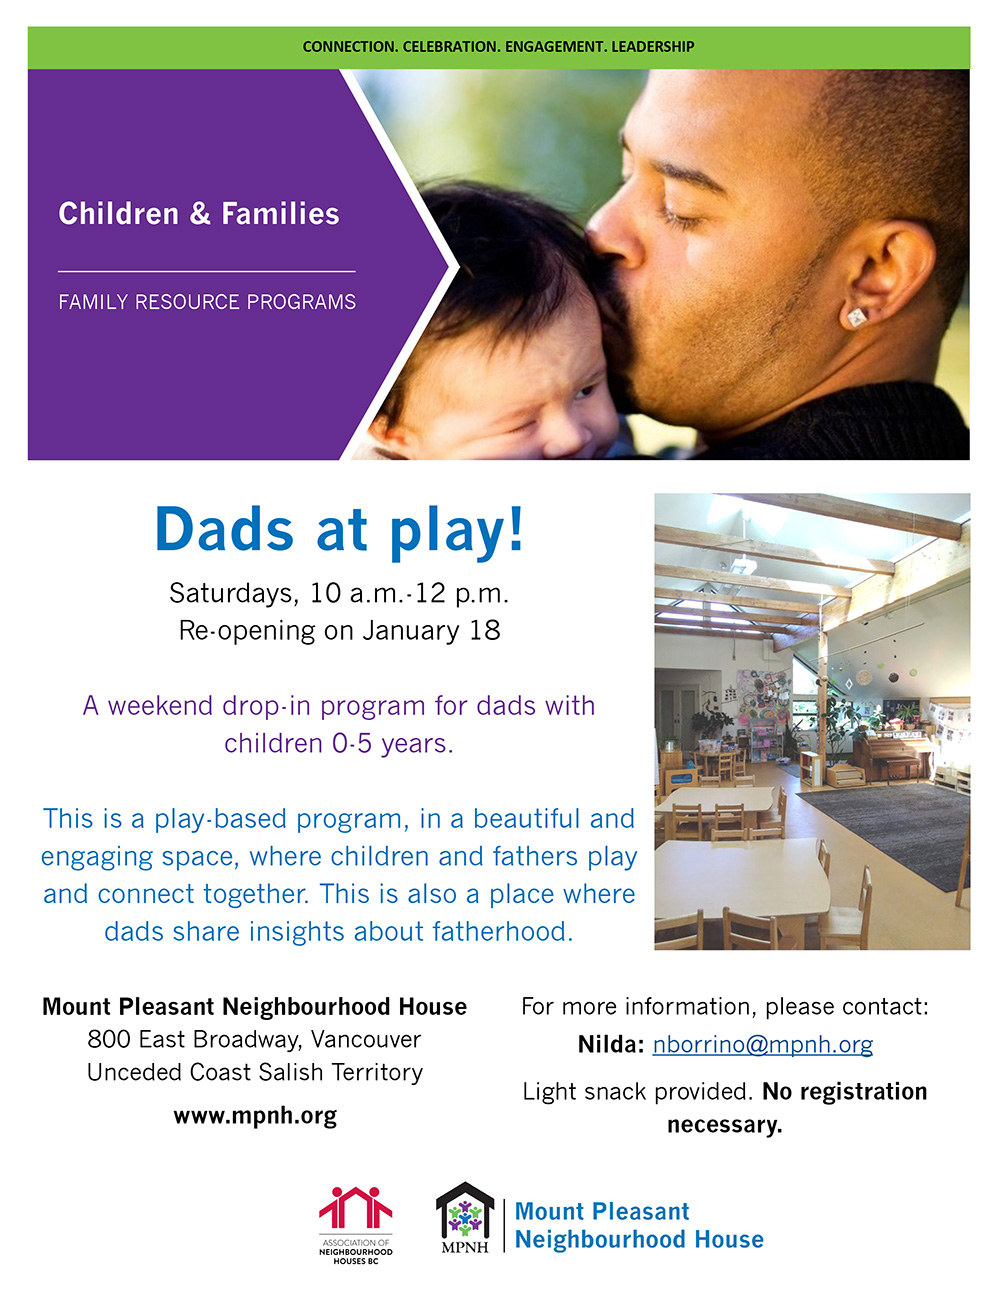 Poster for Dad's at play program showing a loving father and his son